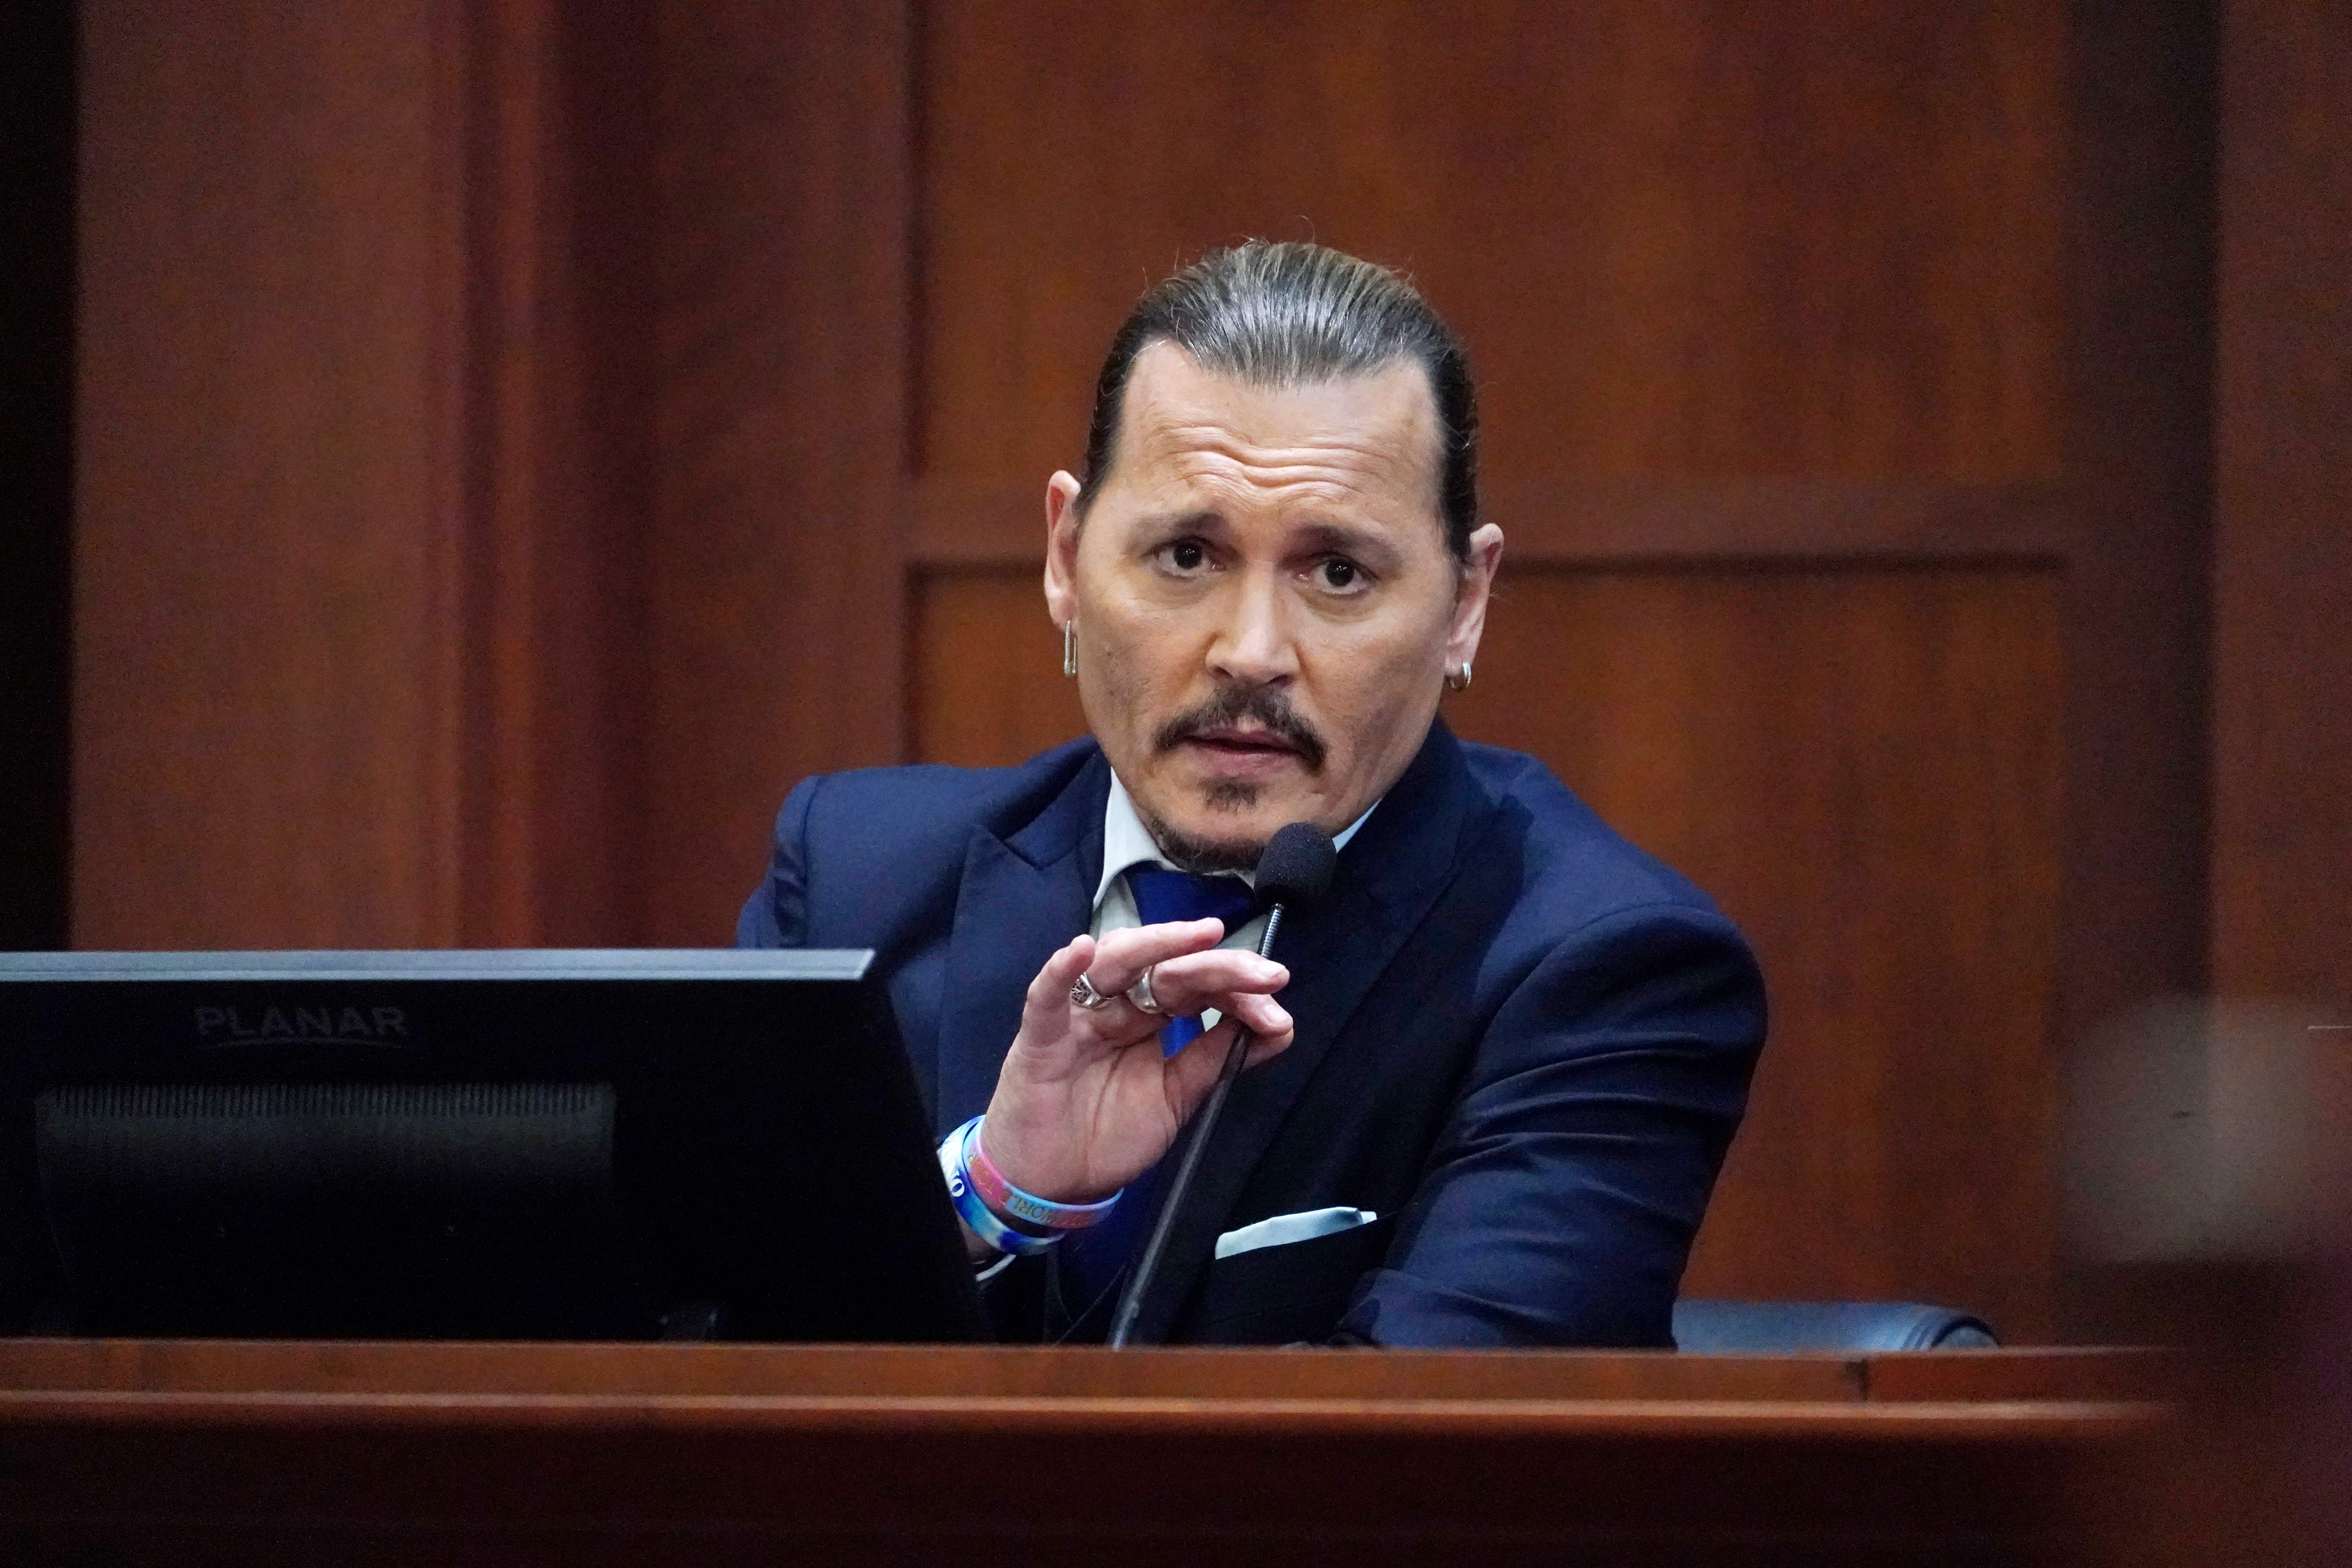 Johnny Depp at the Fairfax County Circuit Courthouse in Fairfax, Virginia on April 25, 2022 | Source: Getty Images